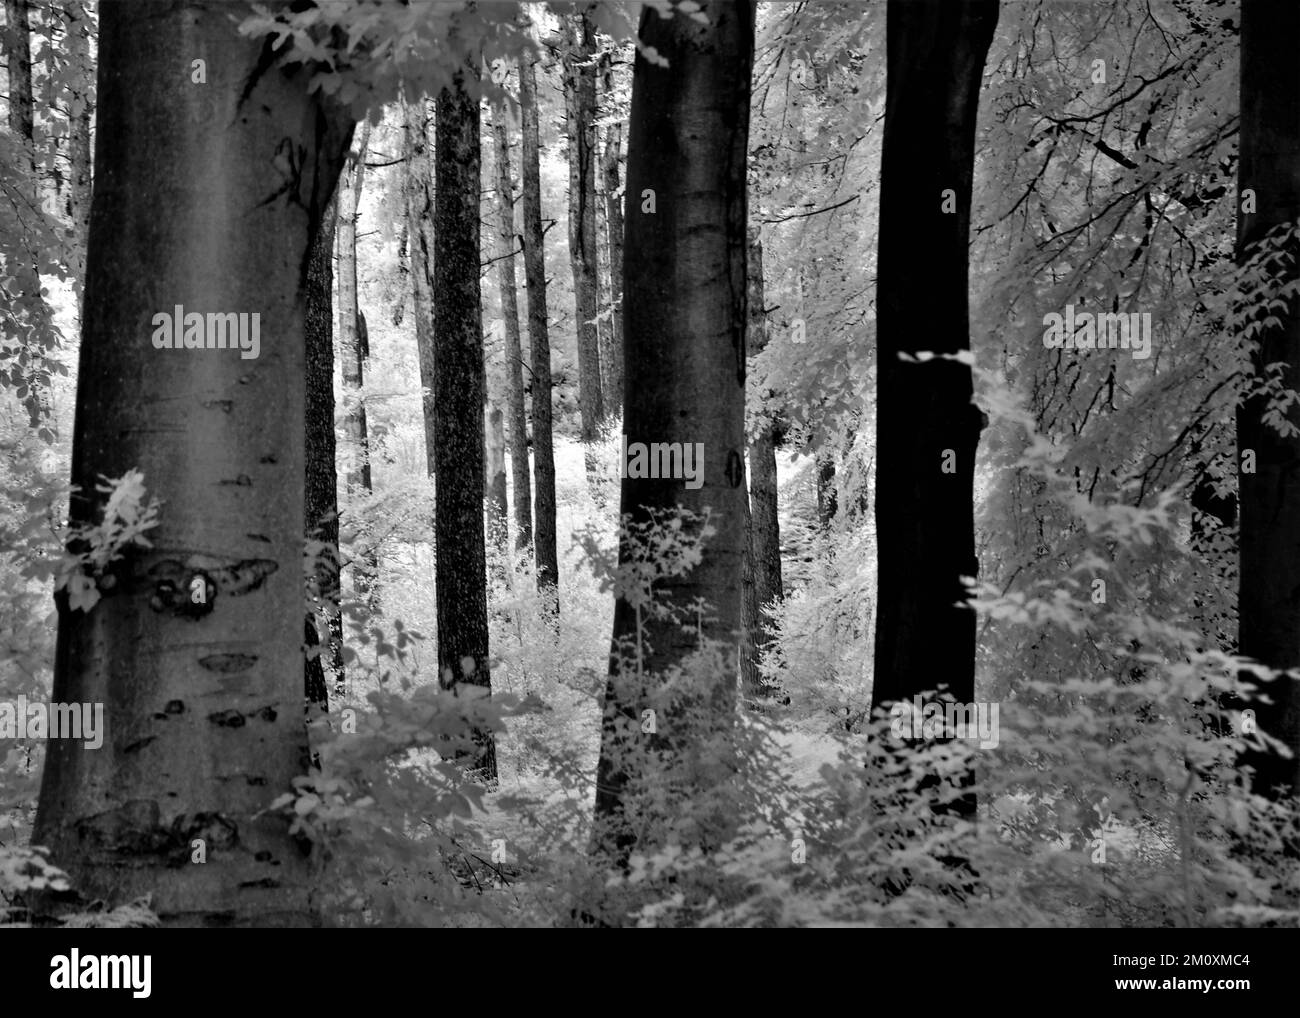 Fine art photograph of trees in black and white, an image of nature in summer in the woodlands and forests of Cannock Chase AONB (area of outstanding Stock Photo